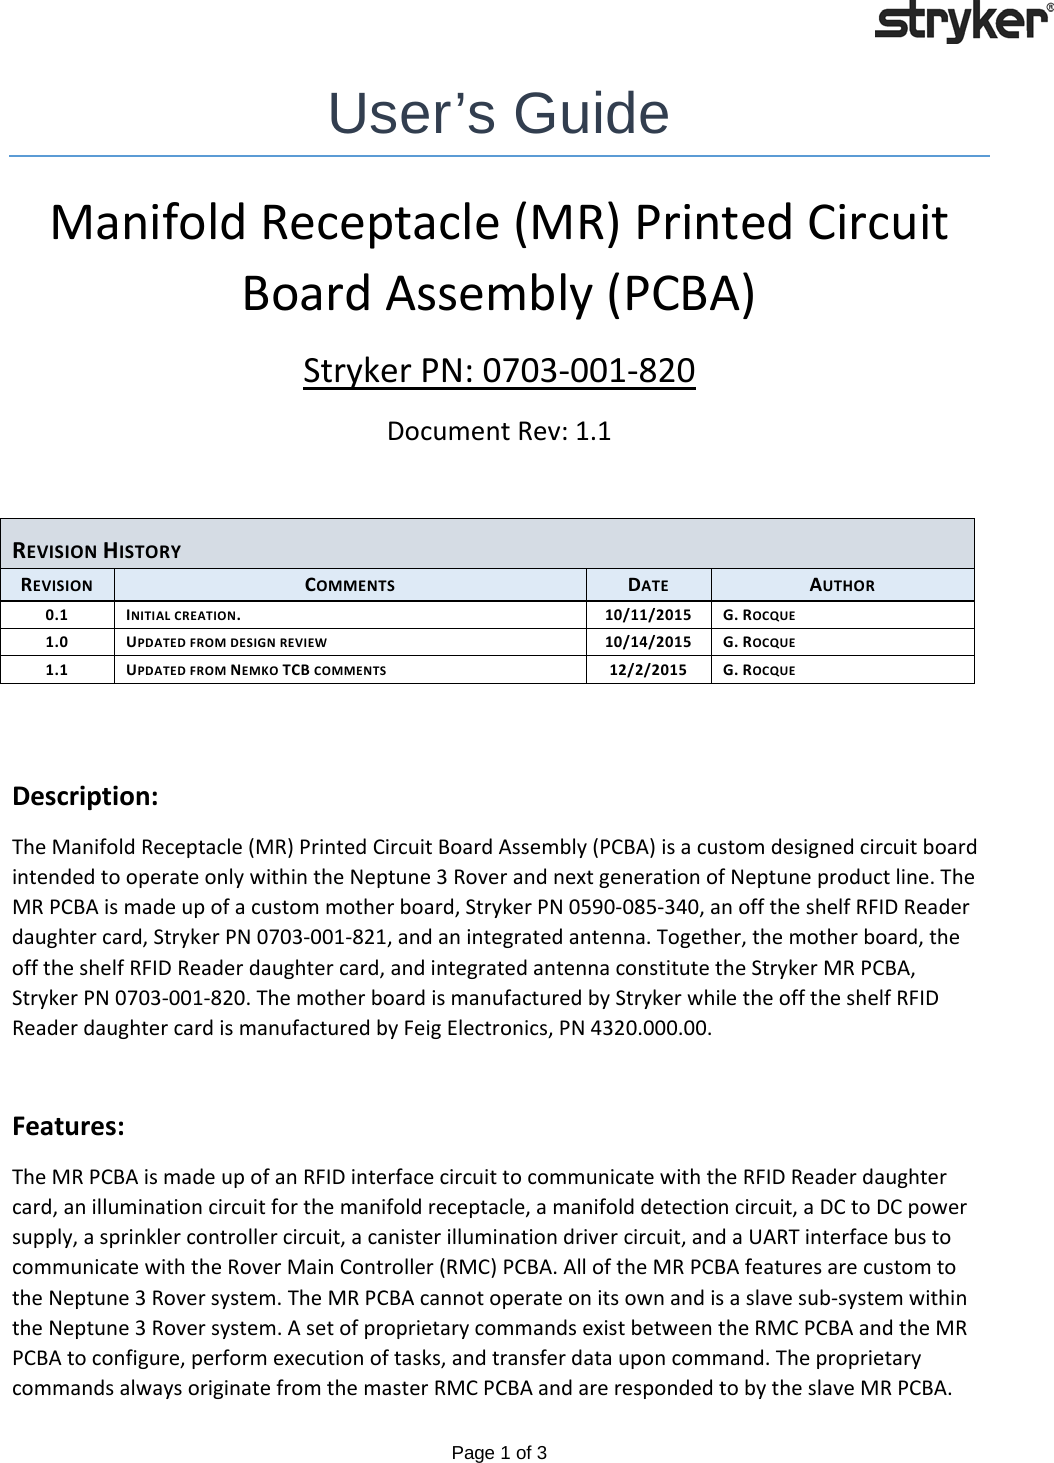   Page 1 of 3   User’s Guide Manifold Receptacle (MR) Printed Circuit Board Assembly (PCBA) Stryker PN: 0703-001-820 Document Rev: 1.1  REVISION HISTORY REVISION COMMENTS DATE AUTHOR 0.1 INITIAL CREATION. 10/11/2015 G. ROCQUE 1.0 UPDATED FROM DESIGN REVIEW 10/14/2015 G. ROCQUE 1.1 UPDATED FROM NEMKO TCB COMMENTS 12/2/2015 G. ROCQUE   Description: The Manifold Receptacle (MR) Printed Circuit Board Assembly (PCBA) is a custom designed circuit board intended to operate only within the Neptune 3 Rover and next generation of Neptune product line. The MR PCBA is made up of a custom mother board, Stryker PN 0590-085-340, an off the shelf RFID Reader daughter card, Stryker PN 0703-001-821, and an integrated antenna. Together, the mother board, the off the shelf RFID Reader daughter card, and integrated antenna constitute the Stryker MR PCBA, Stryker PN 0703-001-820. The mother board is manufactured by Stryker while the off the shelf RFID Reader daughter card is manufactured by Feig Electronics, PN 4320.000.00.  Features: The MR PCBA is made up of an RFID interface circuit to communicate with the RFID Reader daughter card, an illumination circuit for the manifold receptacle, a manifold detection circuit, a DC to DC power supply, a sprinkler controller circuit, a canister illumination driver circuit, and a UART interface bus to communicate with the Rover Main Controller (RMC) PCBA. All of the MR PCBA features are custom to the Neptune 3 Rover system. The MR PCBA cannot operate on its own and is a slave sub-system within the Neptune 3 Rover system. A set of proprietary commands exist between the RMC PCBA and the MR PCBA to configure, perform execution of tasks, and transfer data upon command. The proprietary commands always originate from the master RMC PCBA and are responded to by the slave MR PCBA. 